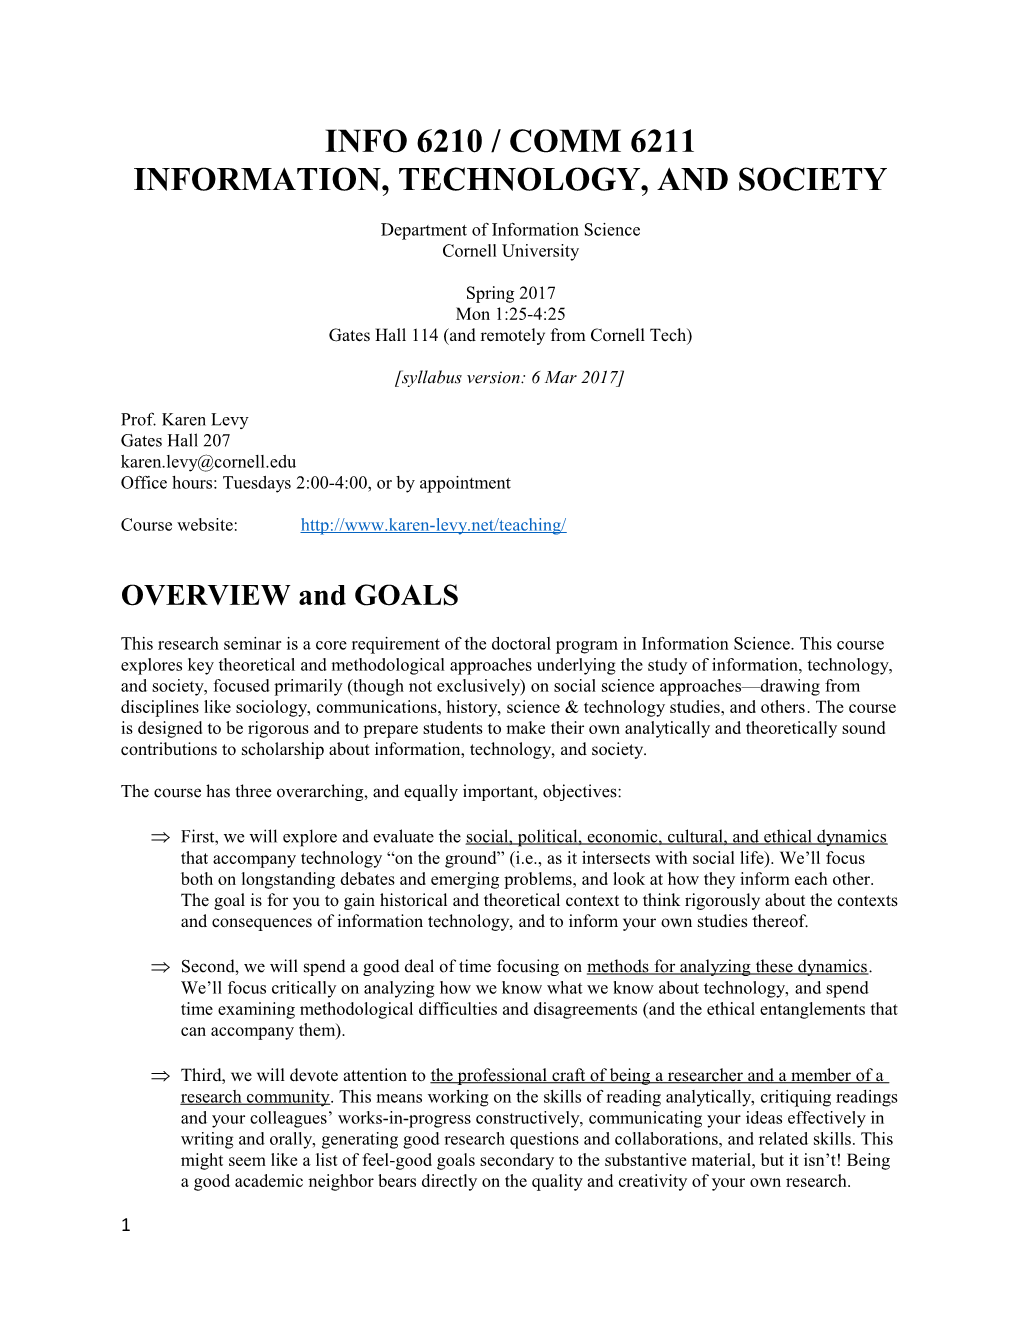 Information, Technology, and Society